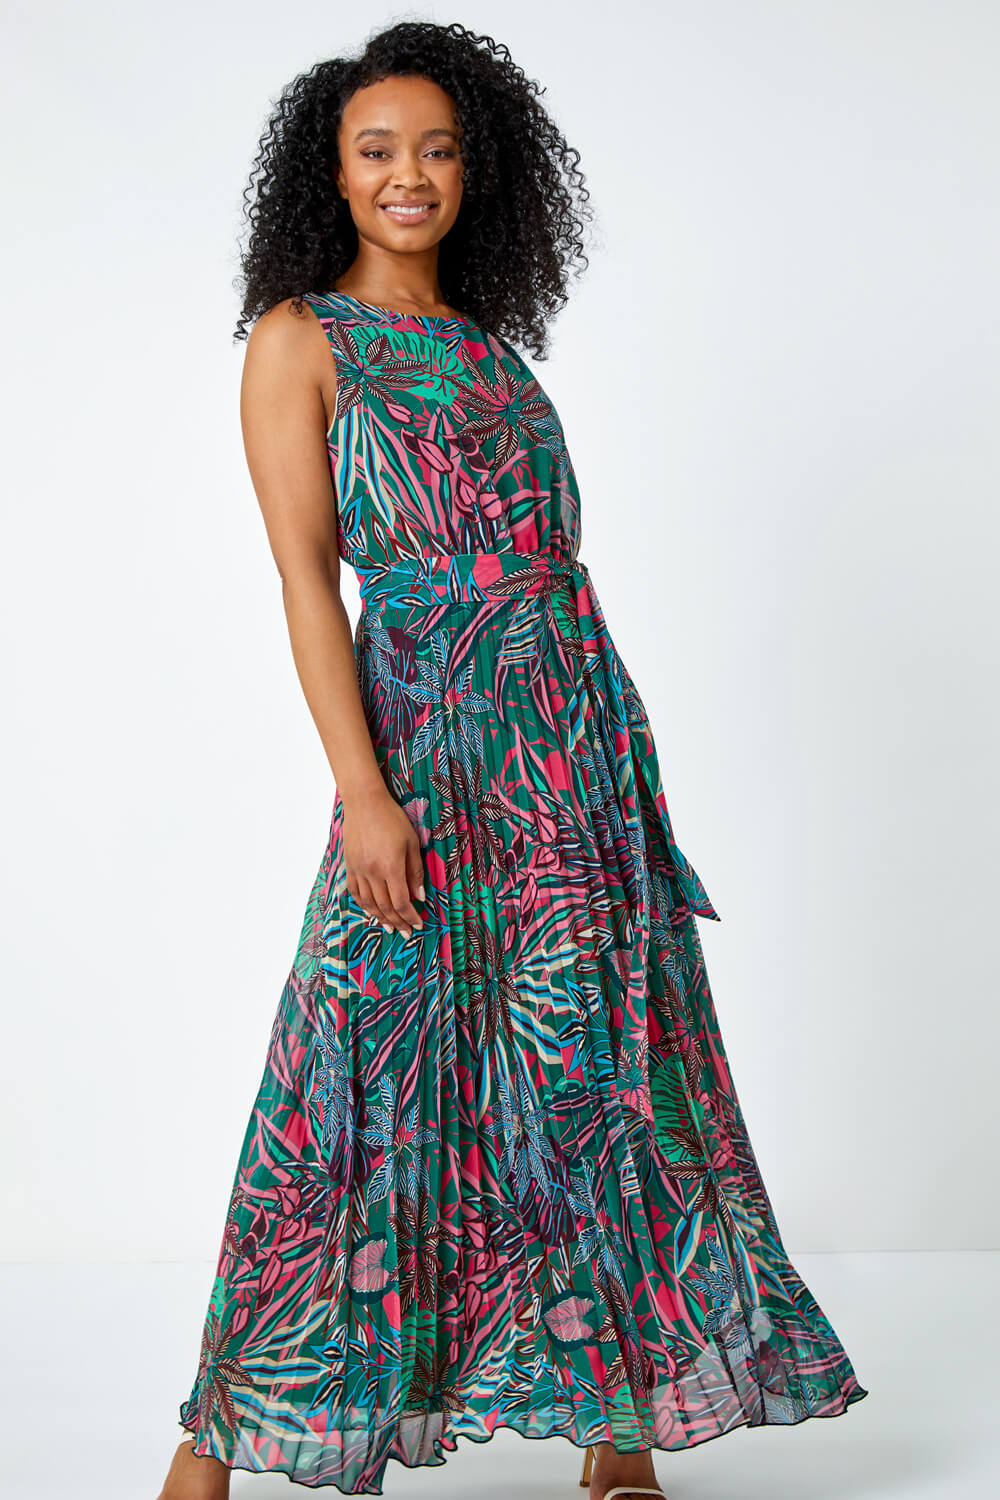 Green Petite Floral Pleated Chiffon Maxi Dress, Image 4 of 5